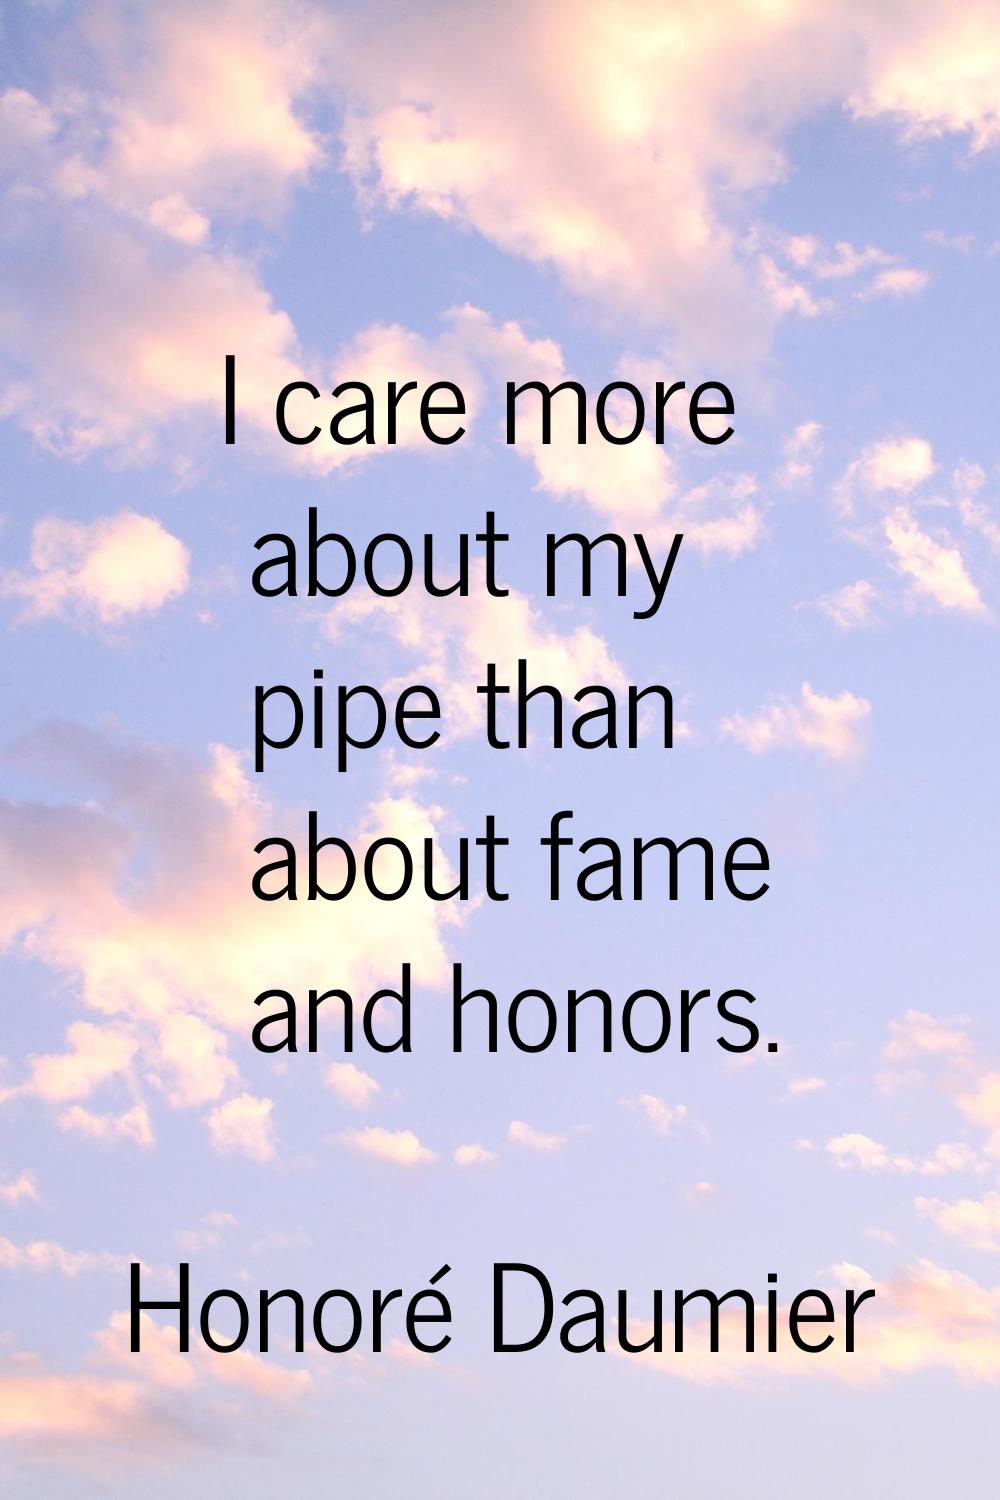 I care more about my pipe than about fame and honors.